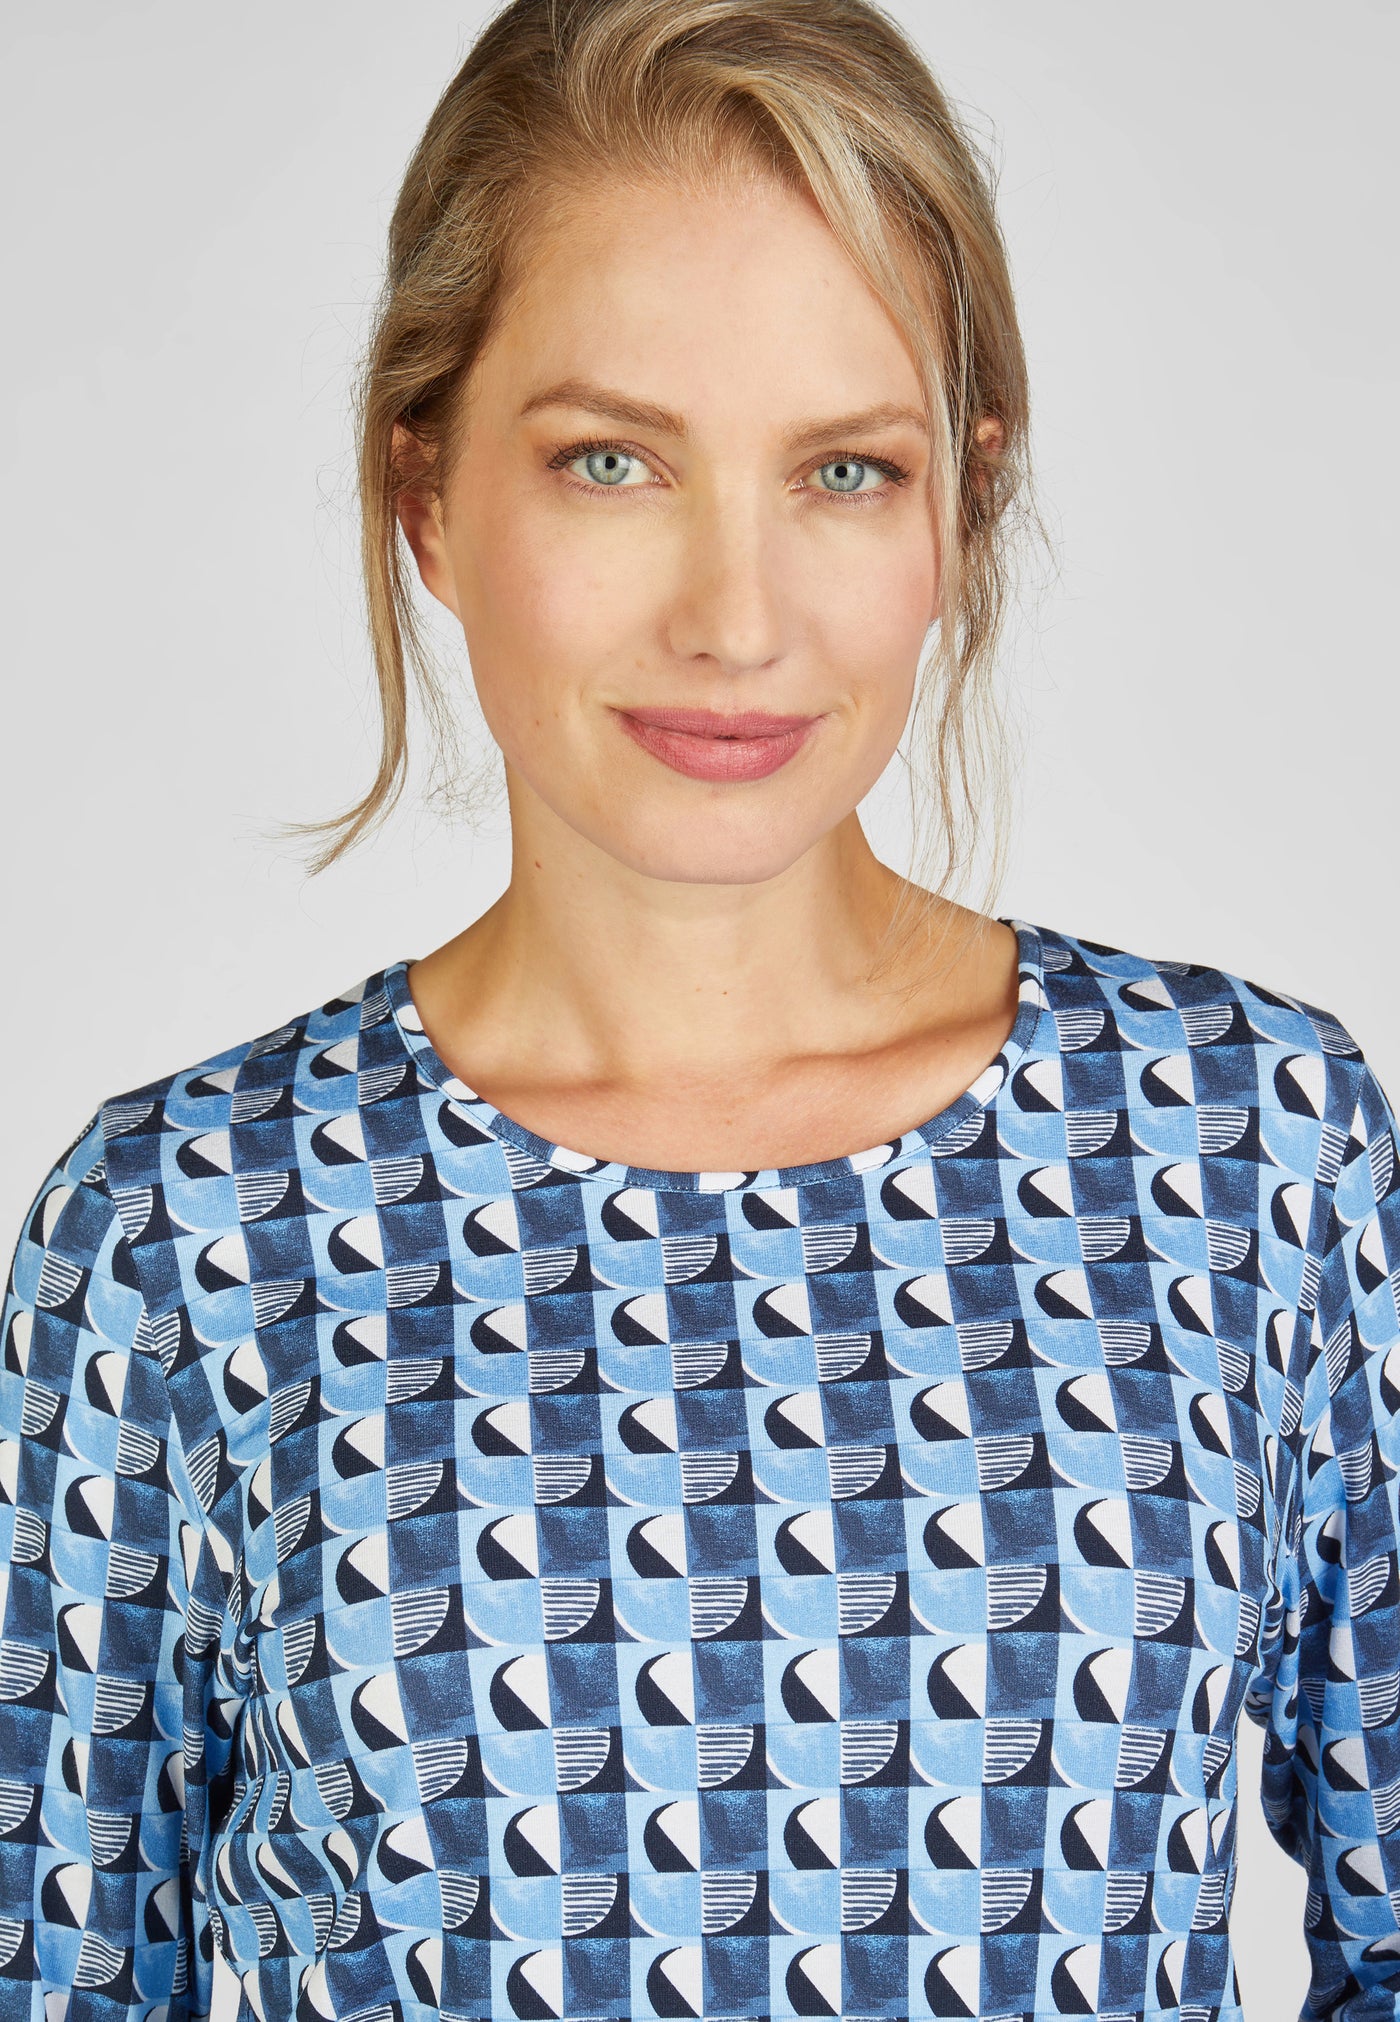 Blue Navy & White Geometric Print Top with Round Neck and 3/4 Sleeves